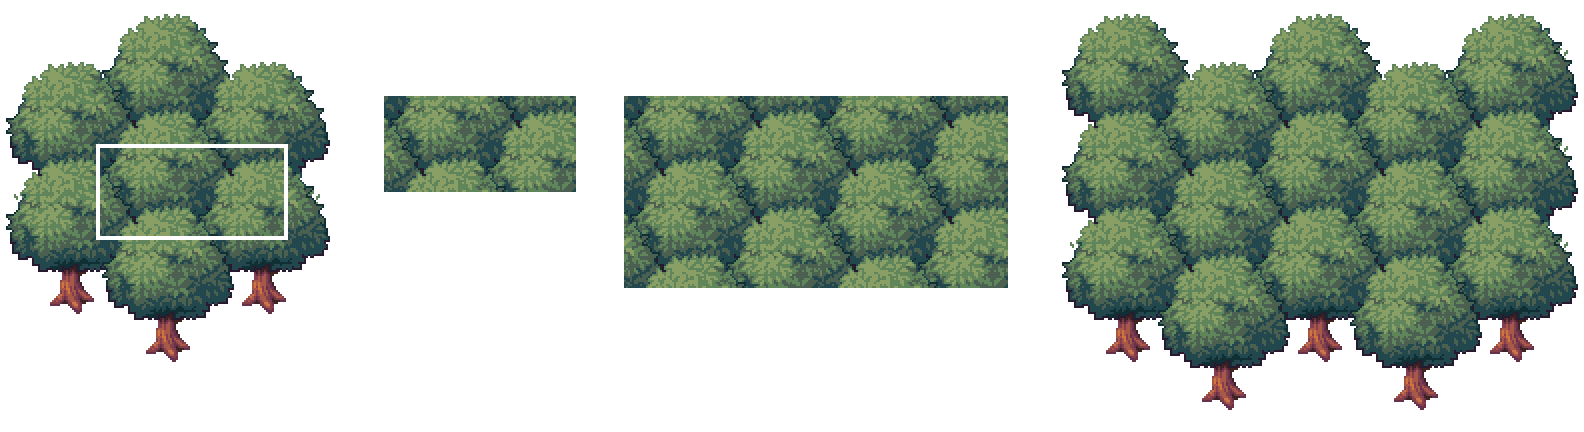 example of how to make repeating trees